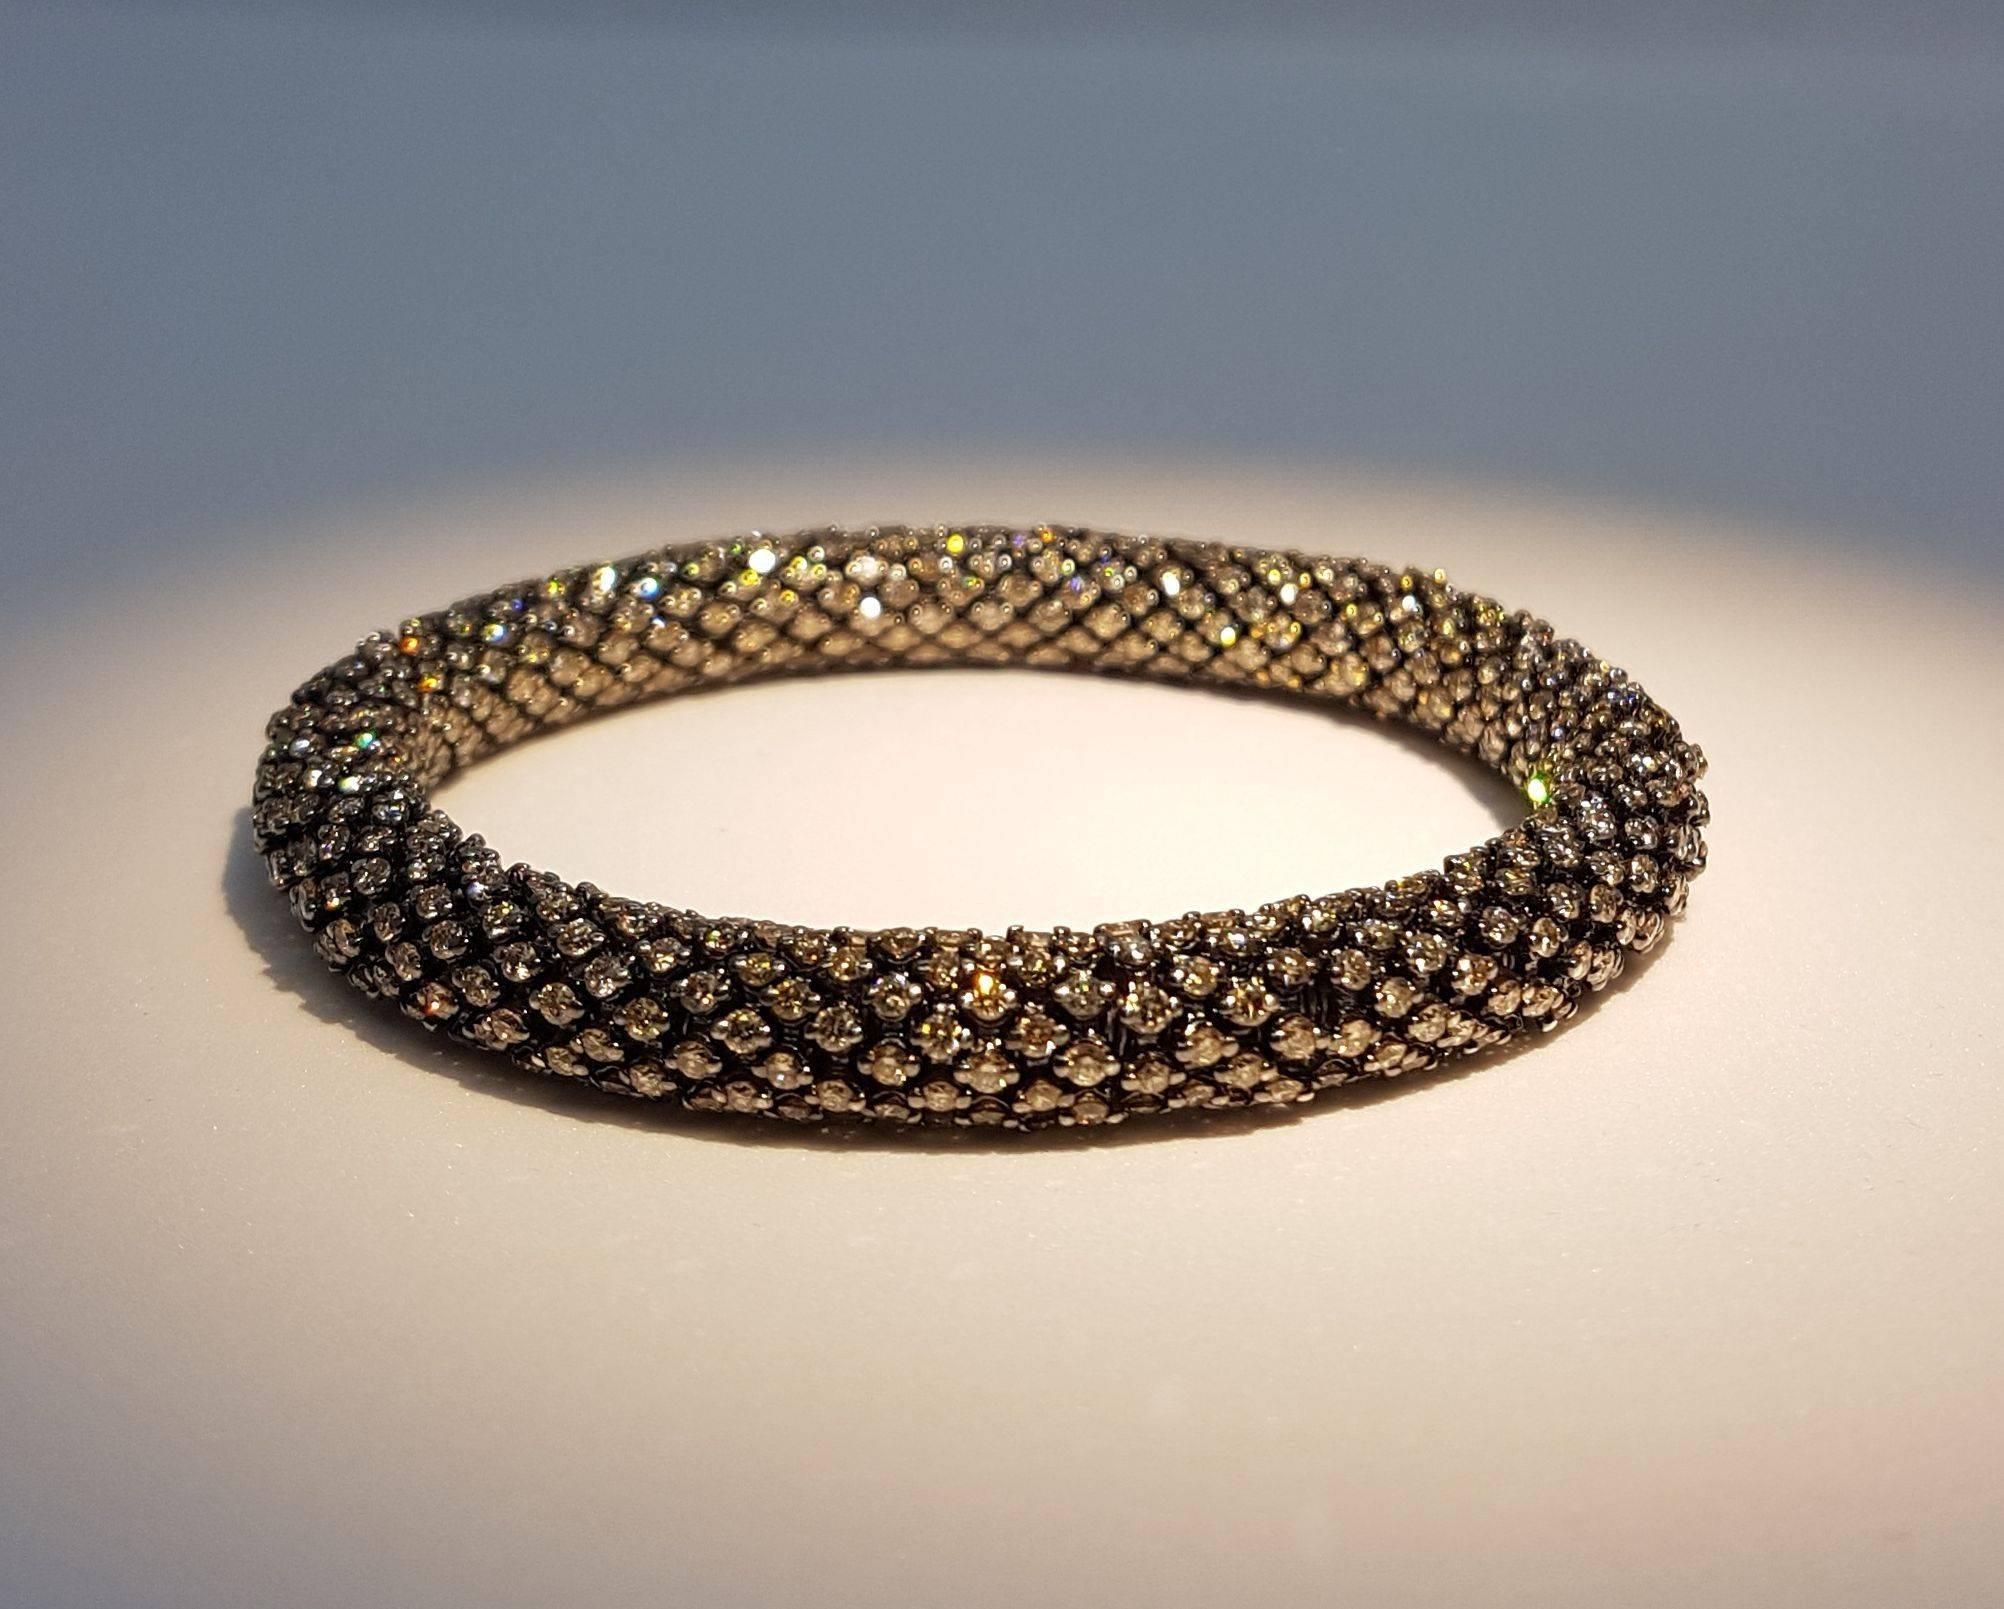 Exceptional brown diamond and white gold bracelet.
The bracelet is very flexible and therefore adapts to different wrist sizes.
Total weight of diamonds: 25.80 carats.
Chic and sporty at the same time!
Different models available!